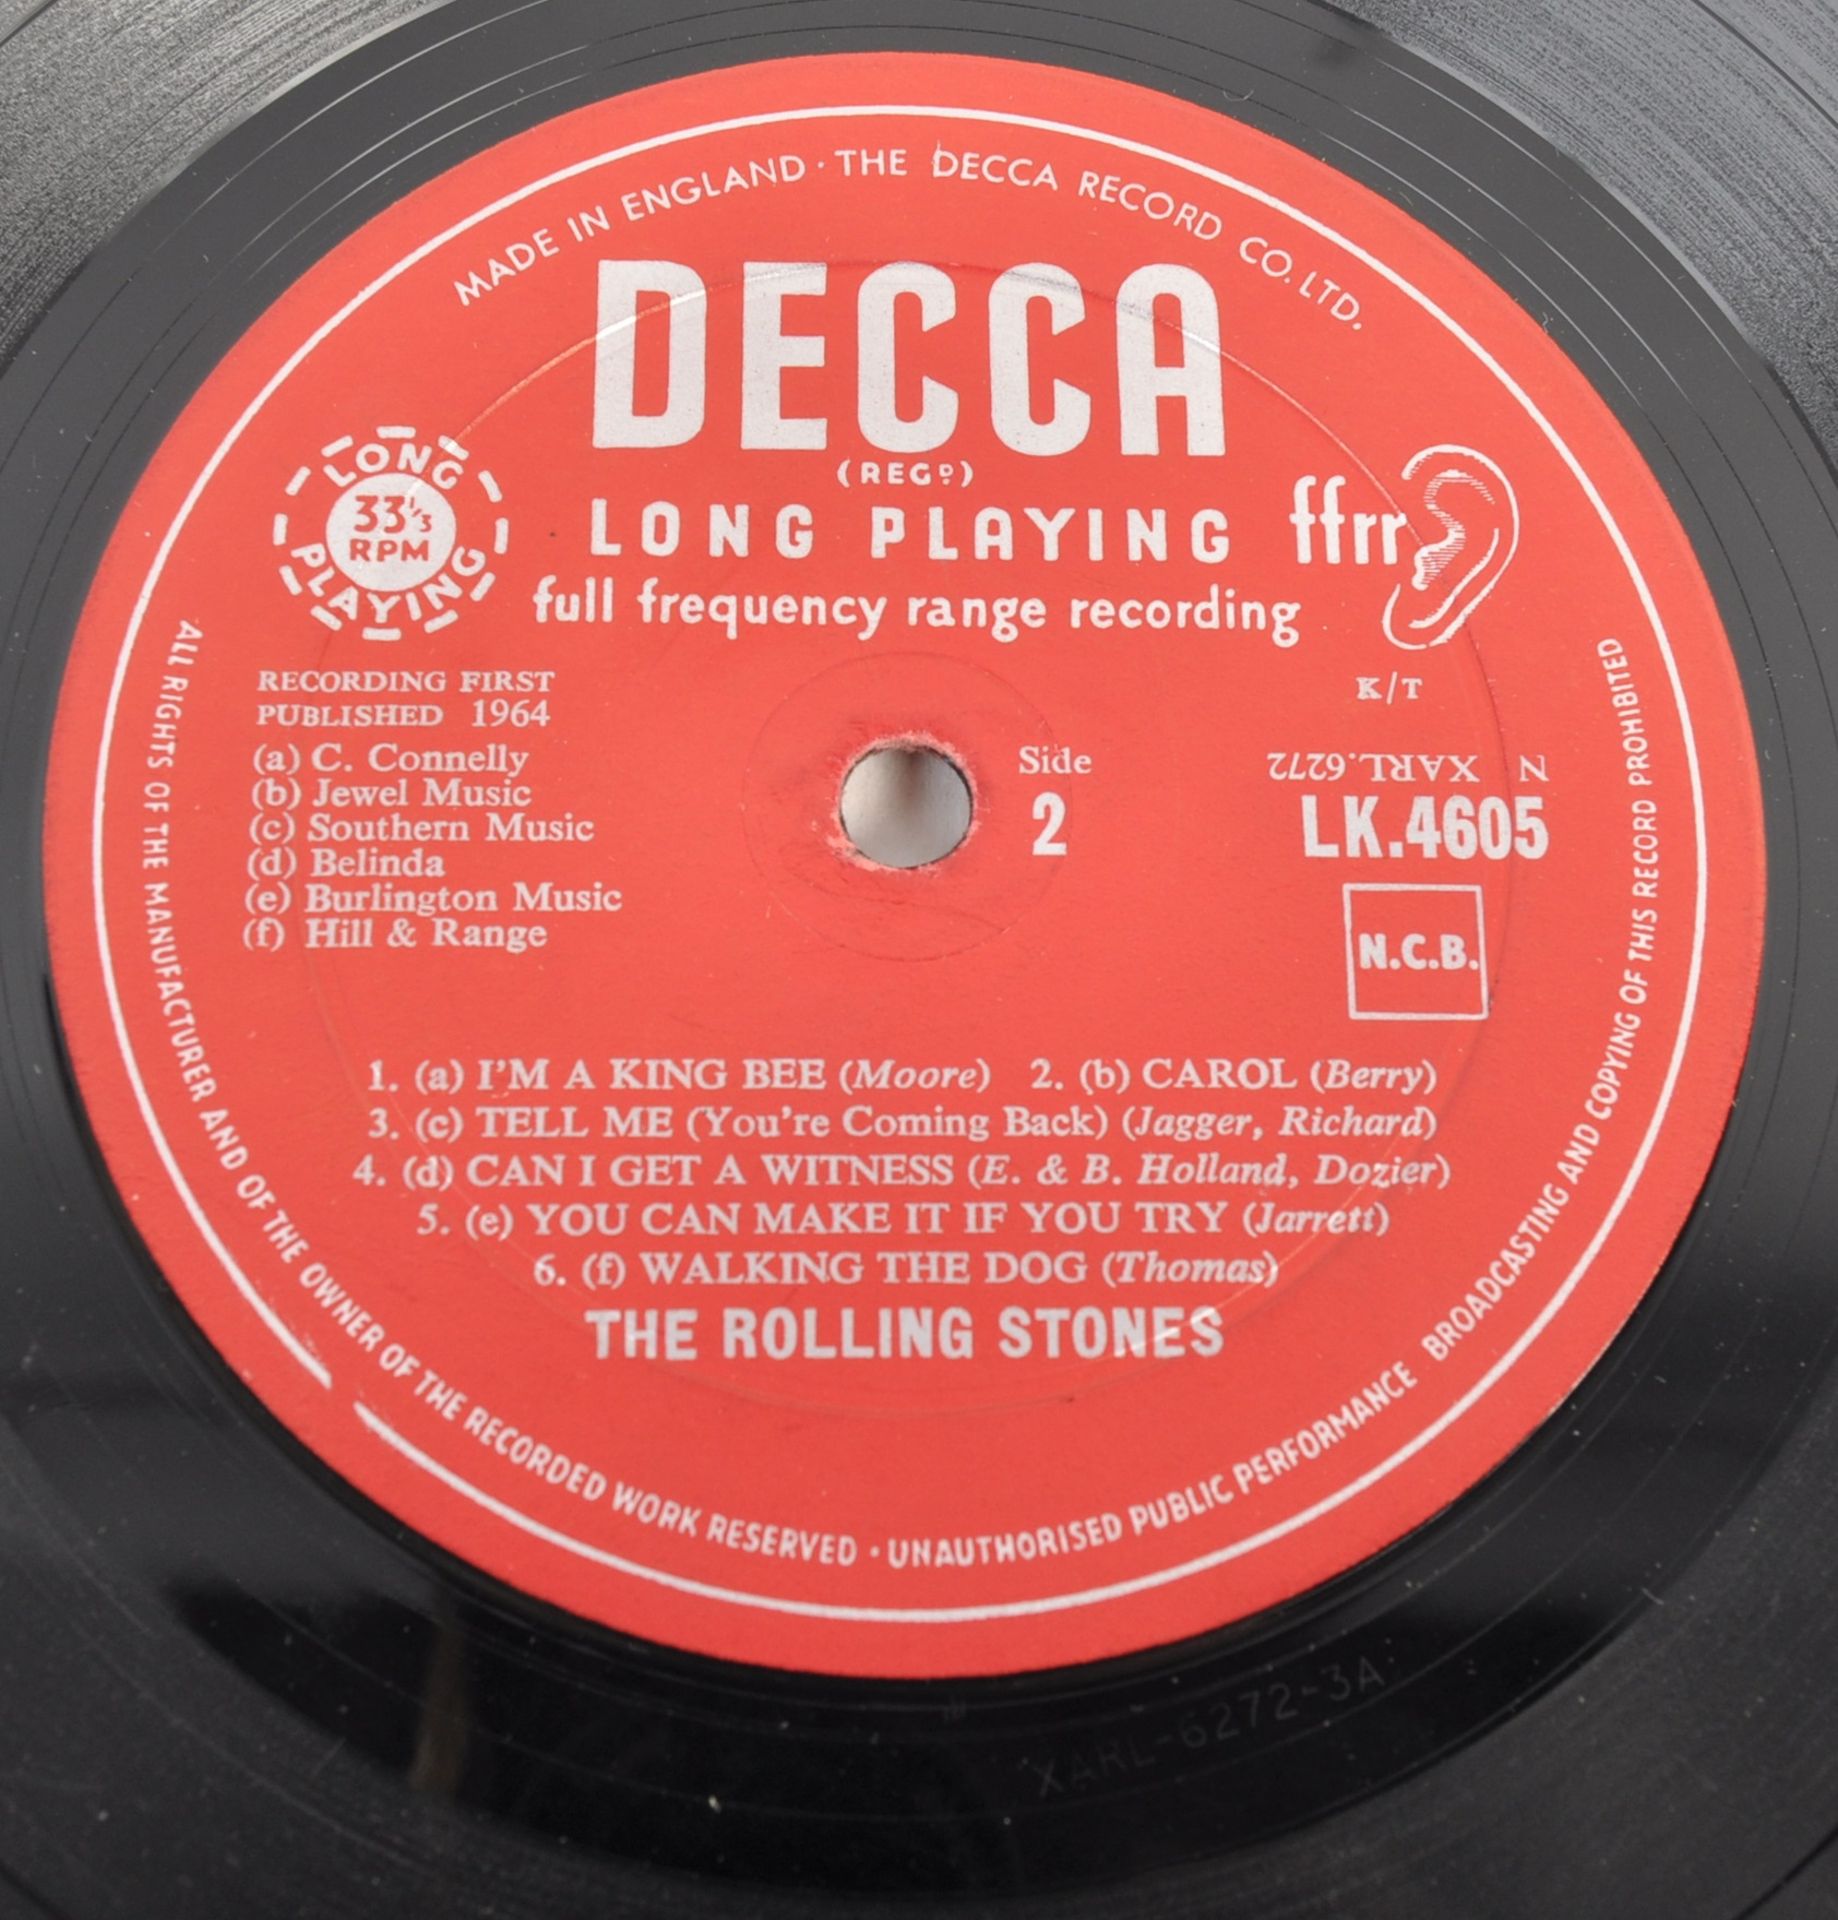 THE ROLLING STONES FIRST ALBUM - 1964 DECCA RELEASE - Image 3 of 3